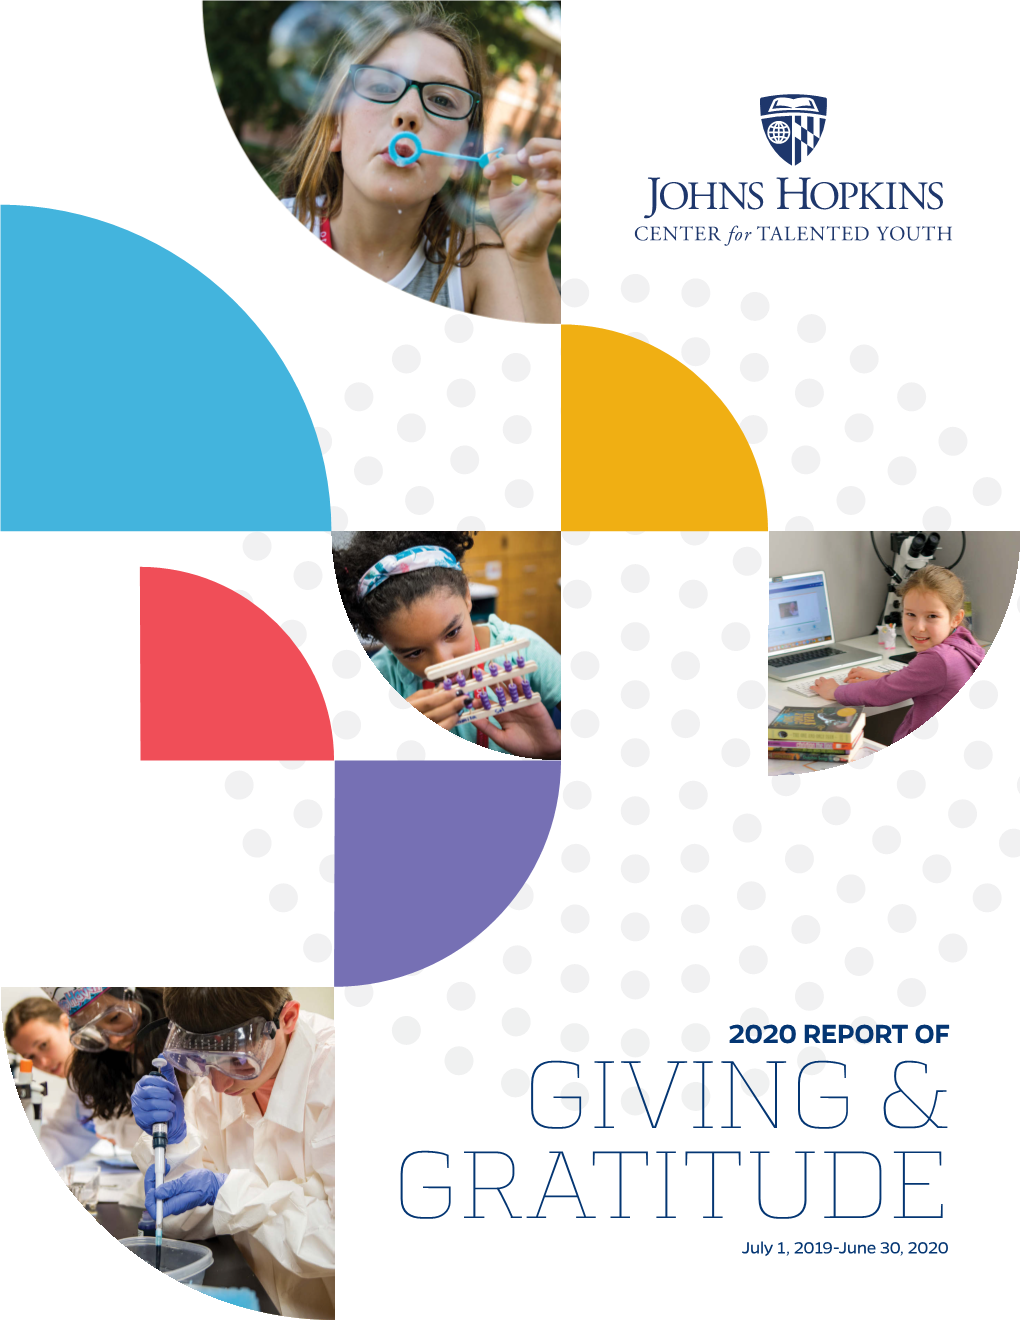 Johns Hopkins CTY 2020 Report of Giving & Gratitude